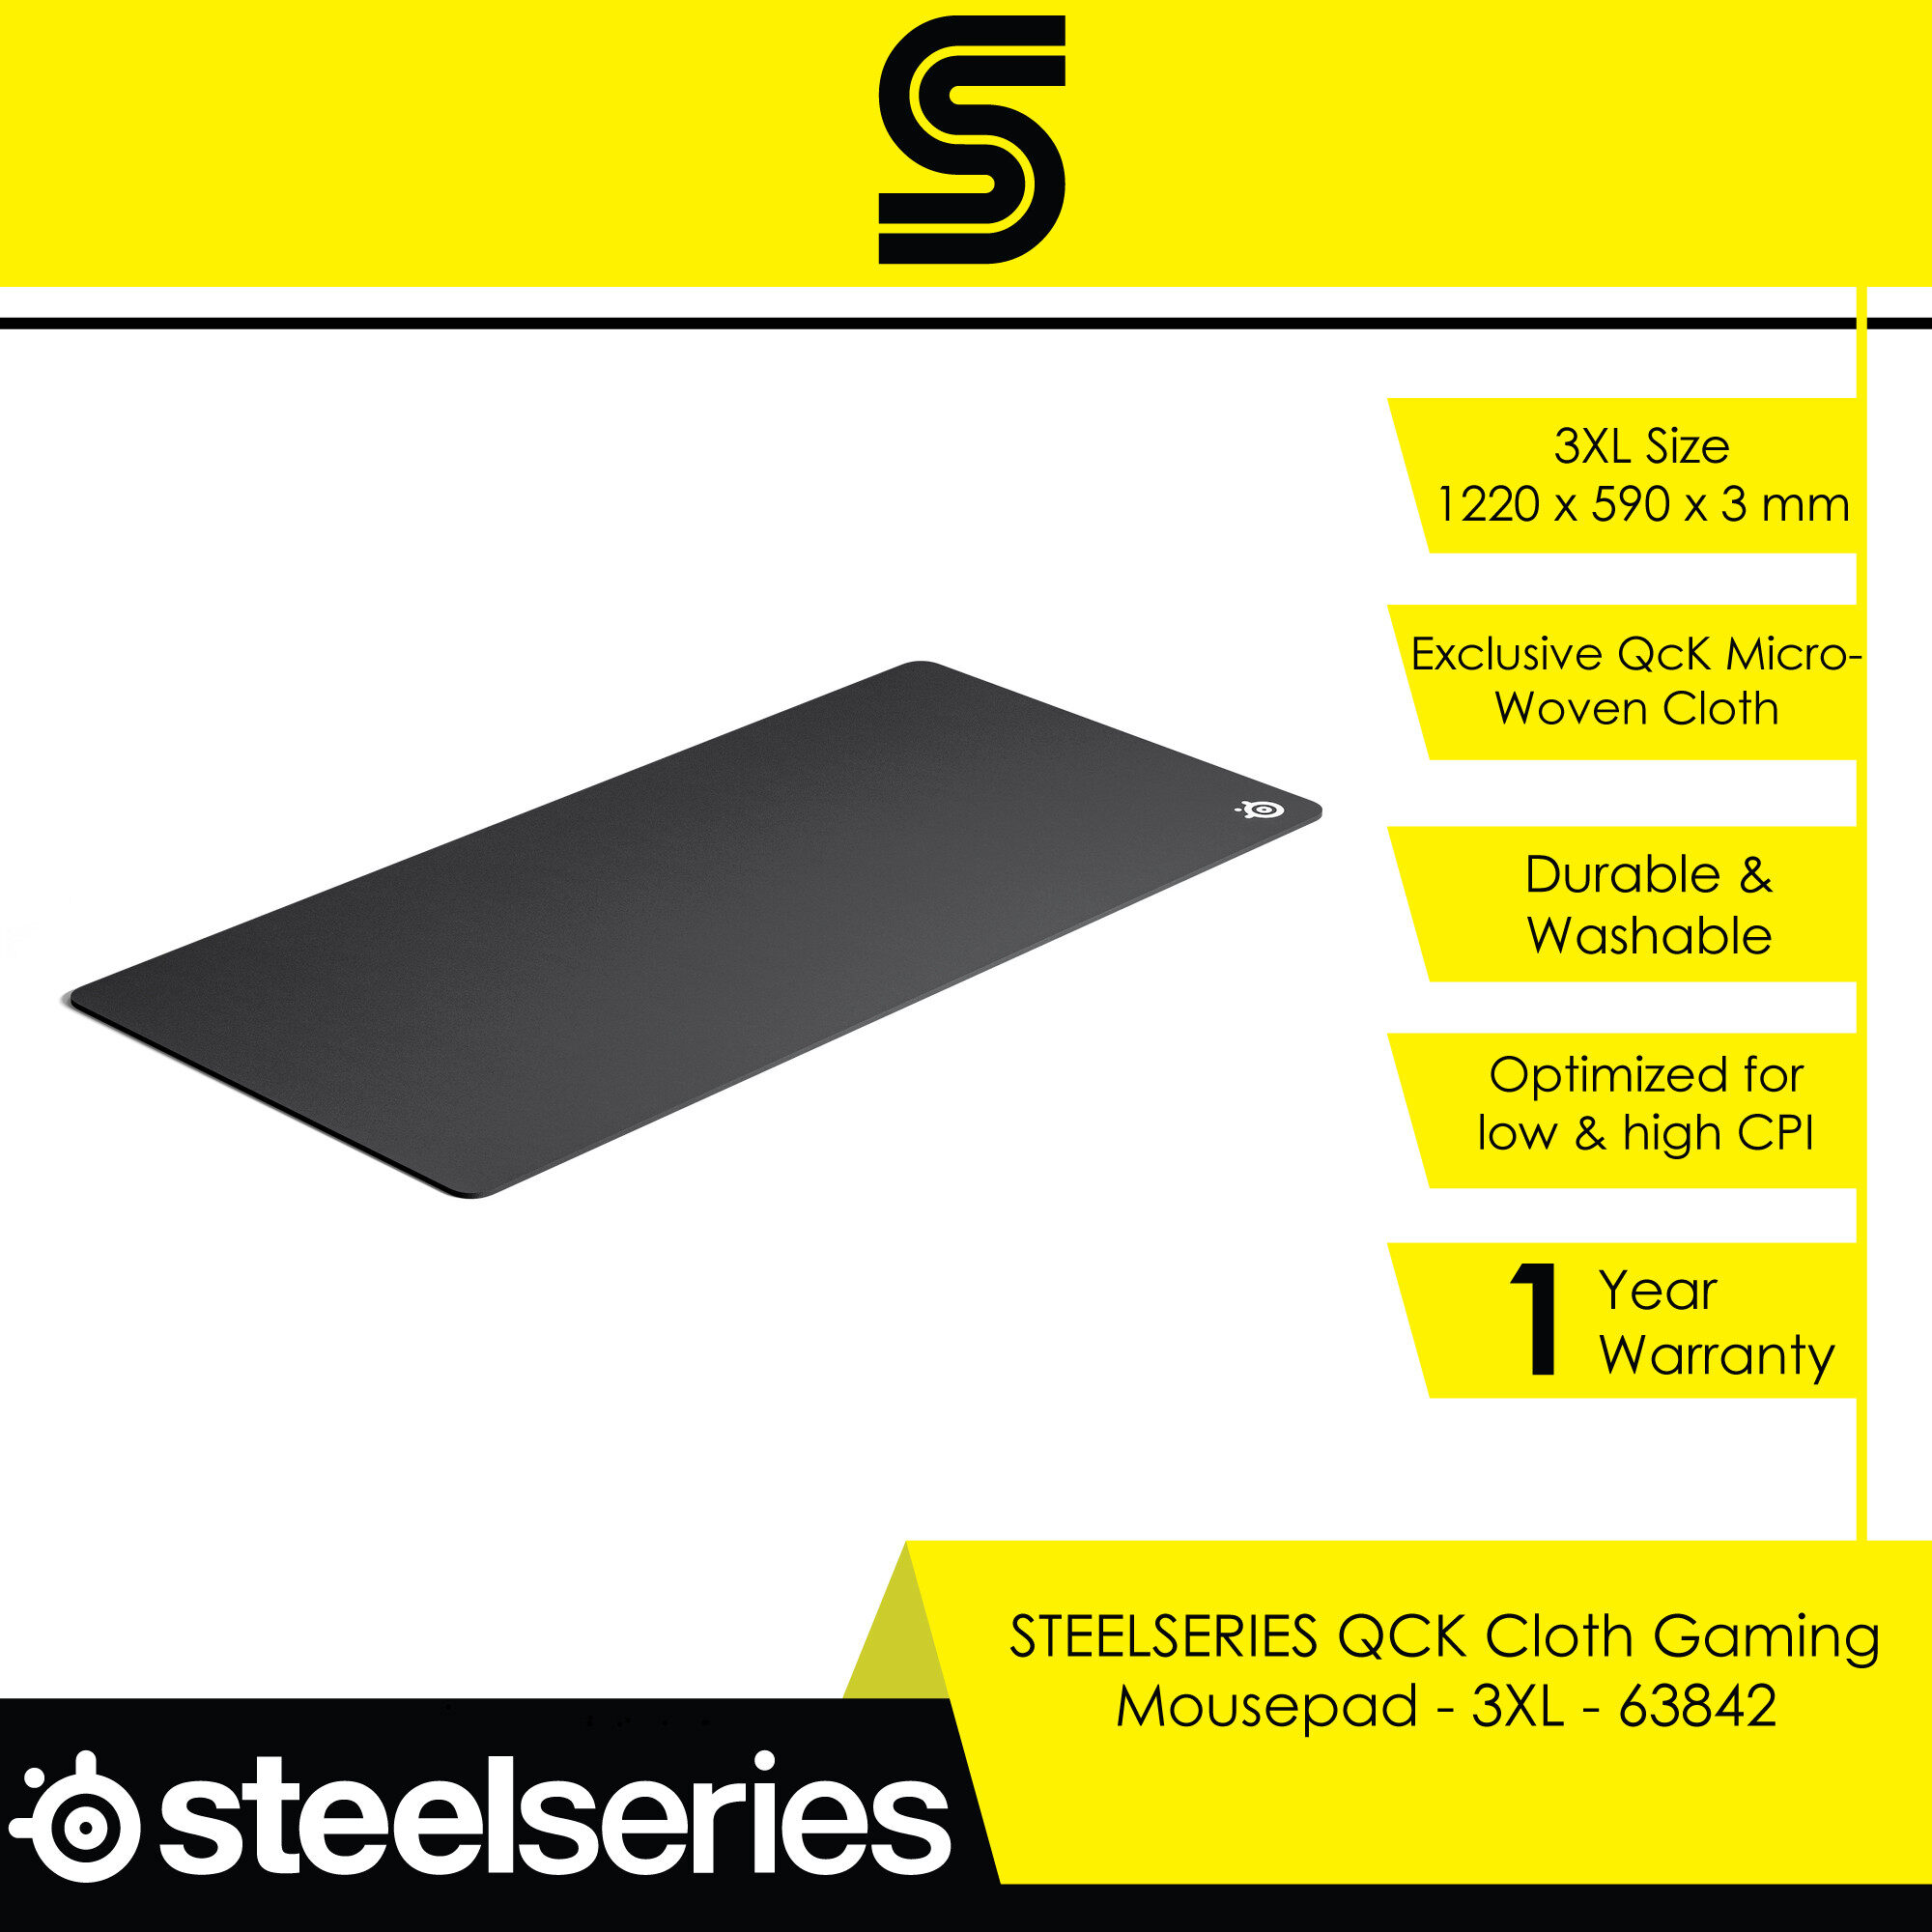 STEELSERIES QCK Cloth Gaming Mouse Pad 3XL - 63842